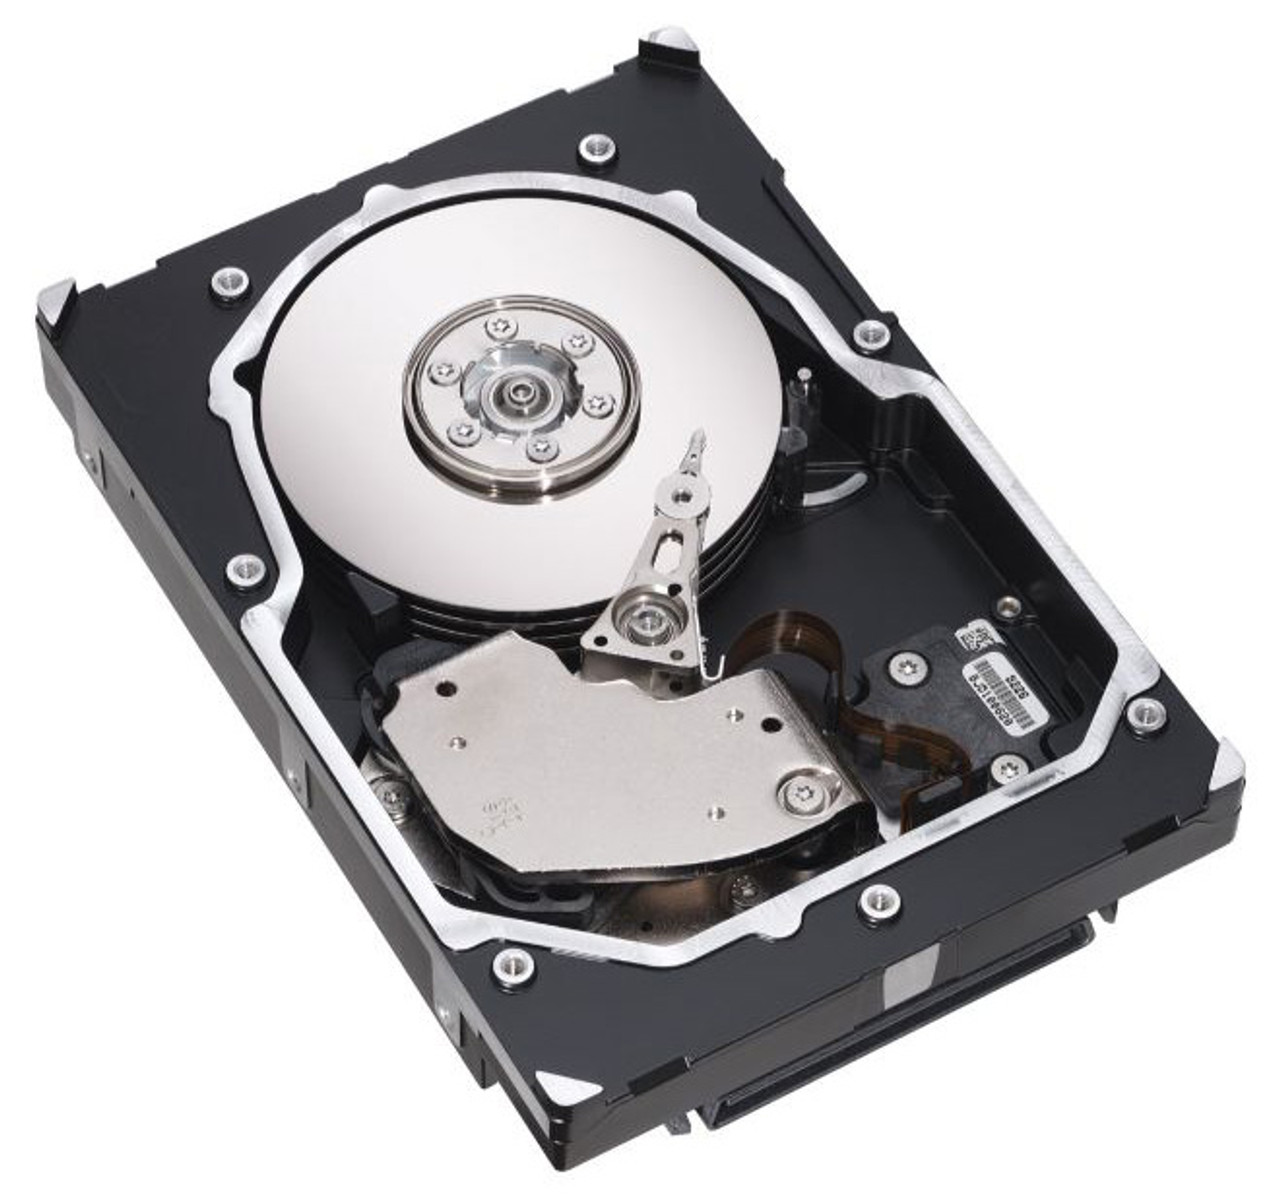 X278 NetApp 144GB 15000RPM Fibre Channel 4Gbps 16MB Cache 3.5-inch Internal Hard Drive for DS14MK4